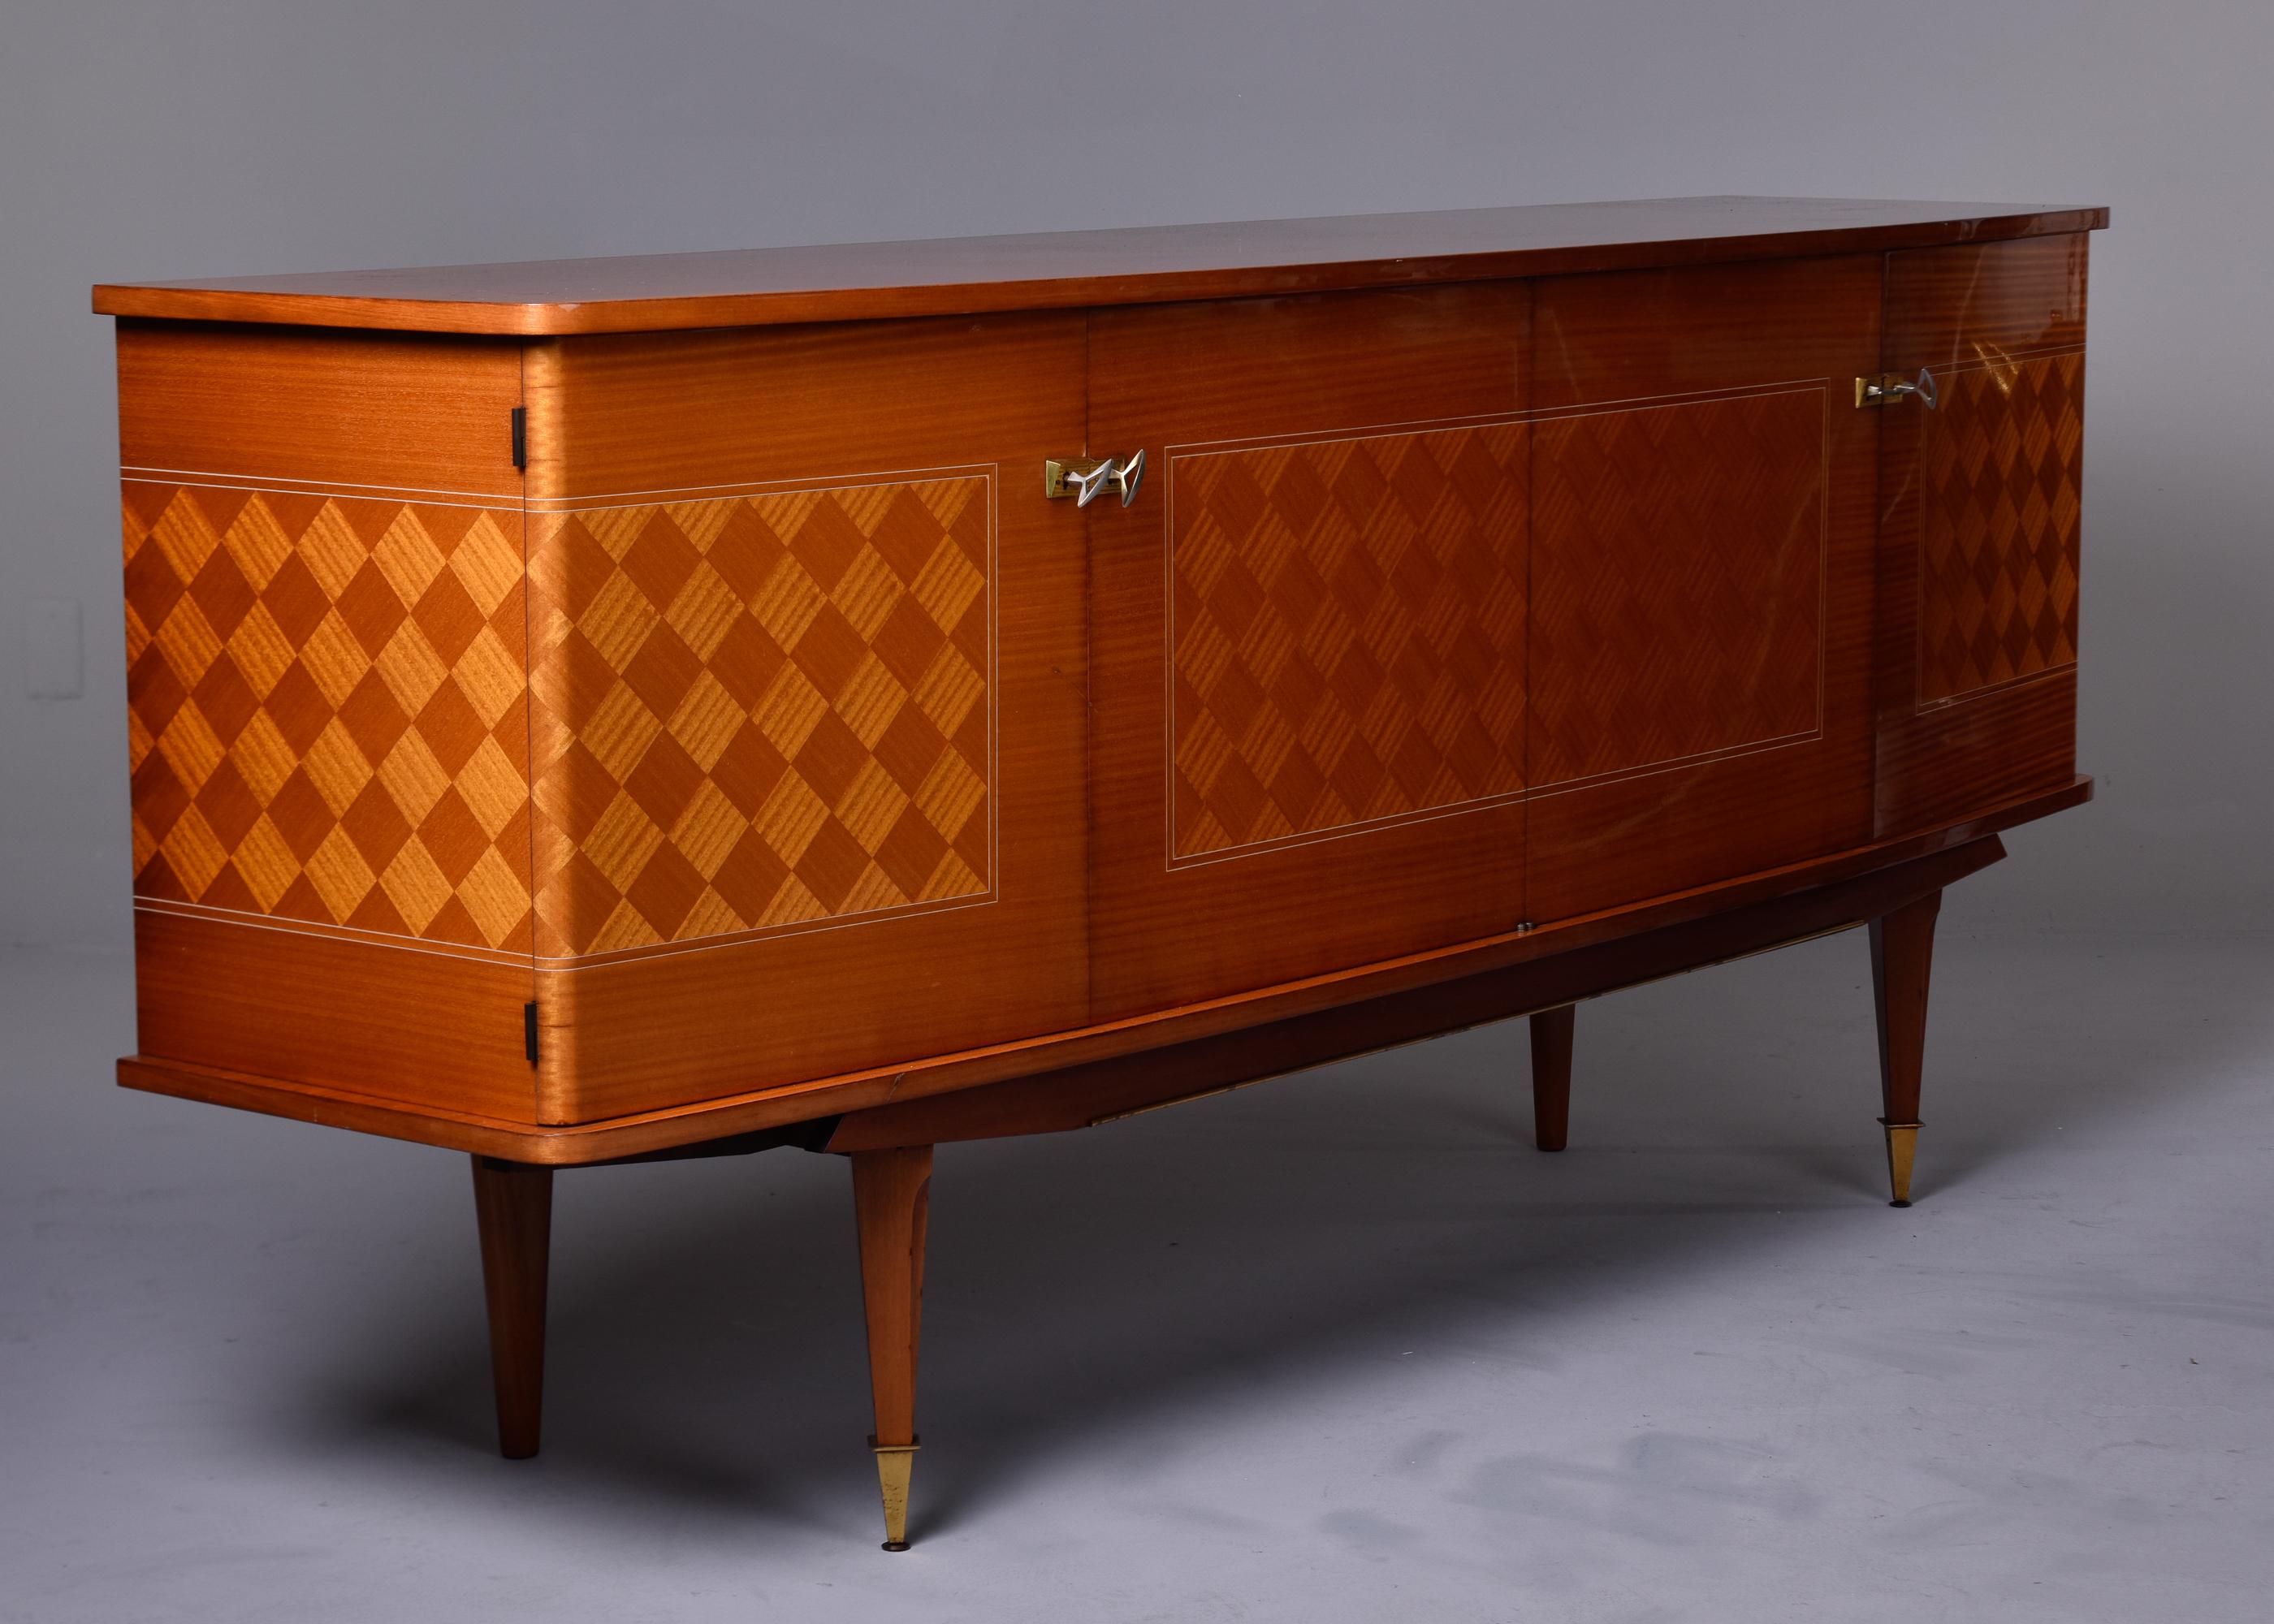 French Art Deco Mahogany Buffet Sideboard Credenza with Checkerboard Parquetry For Sale 9